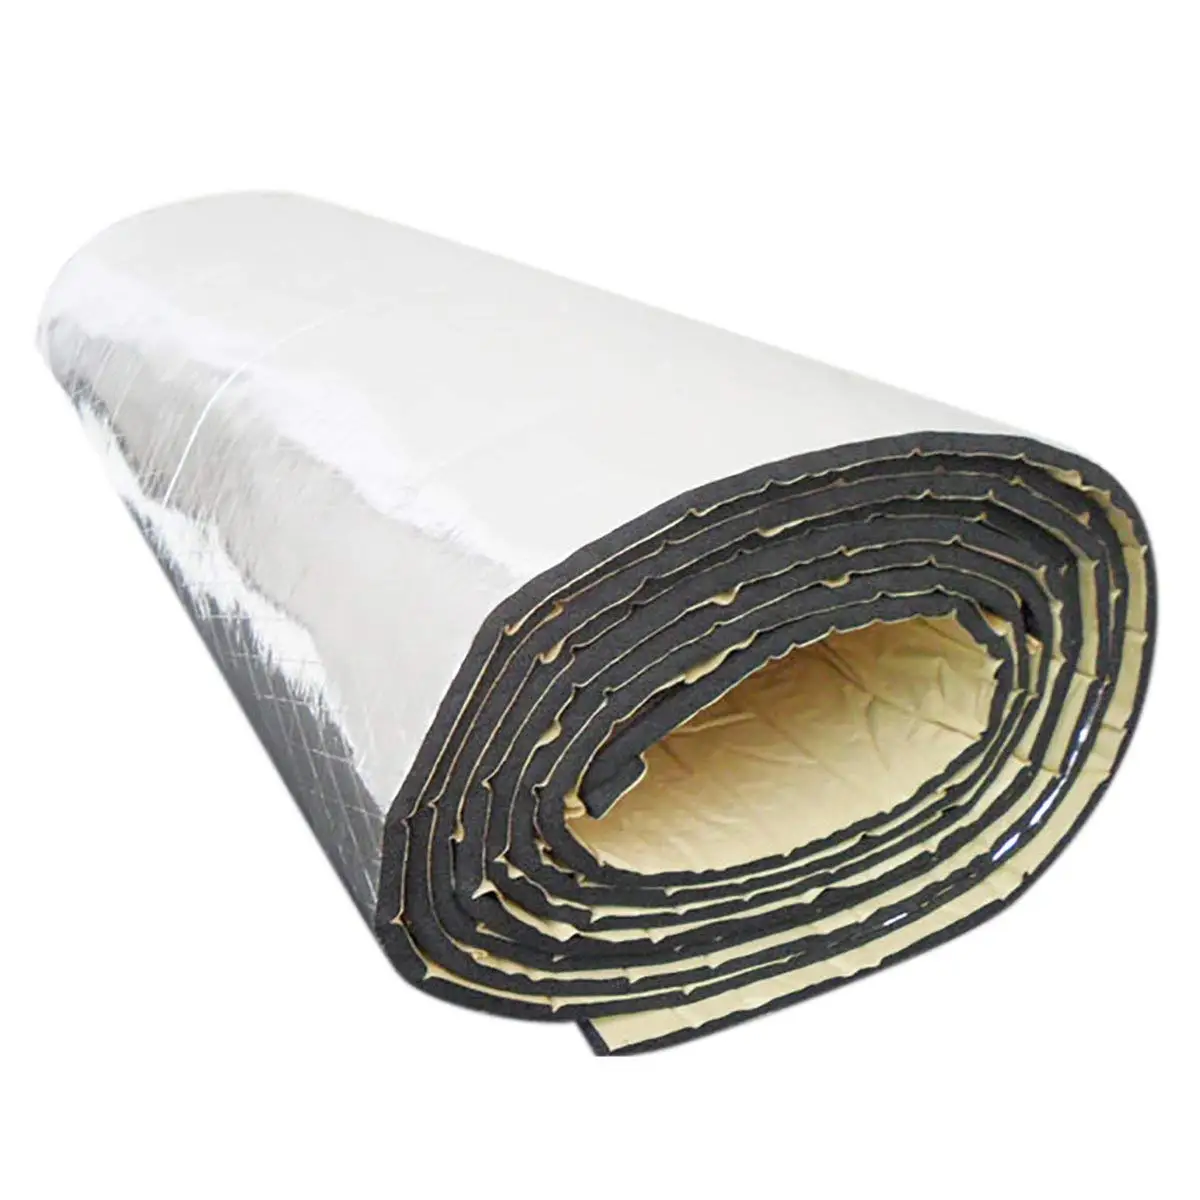 Cheap Noise Proof Insulation, find Noise Proof Insulation deals on line